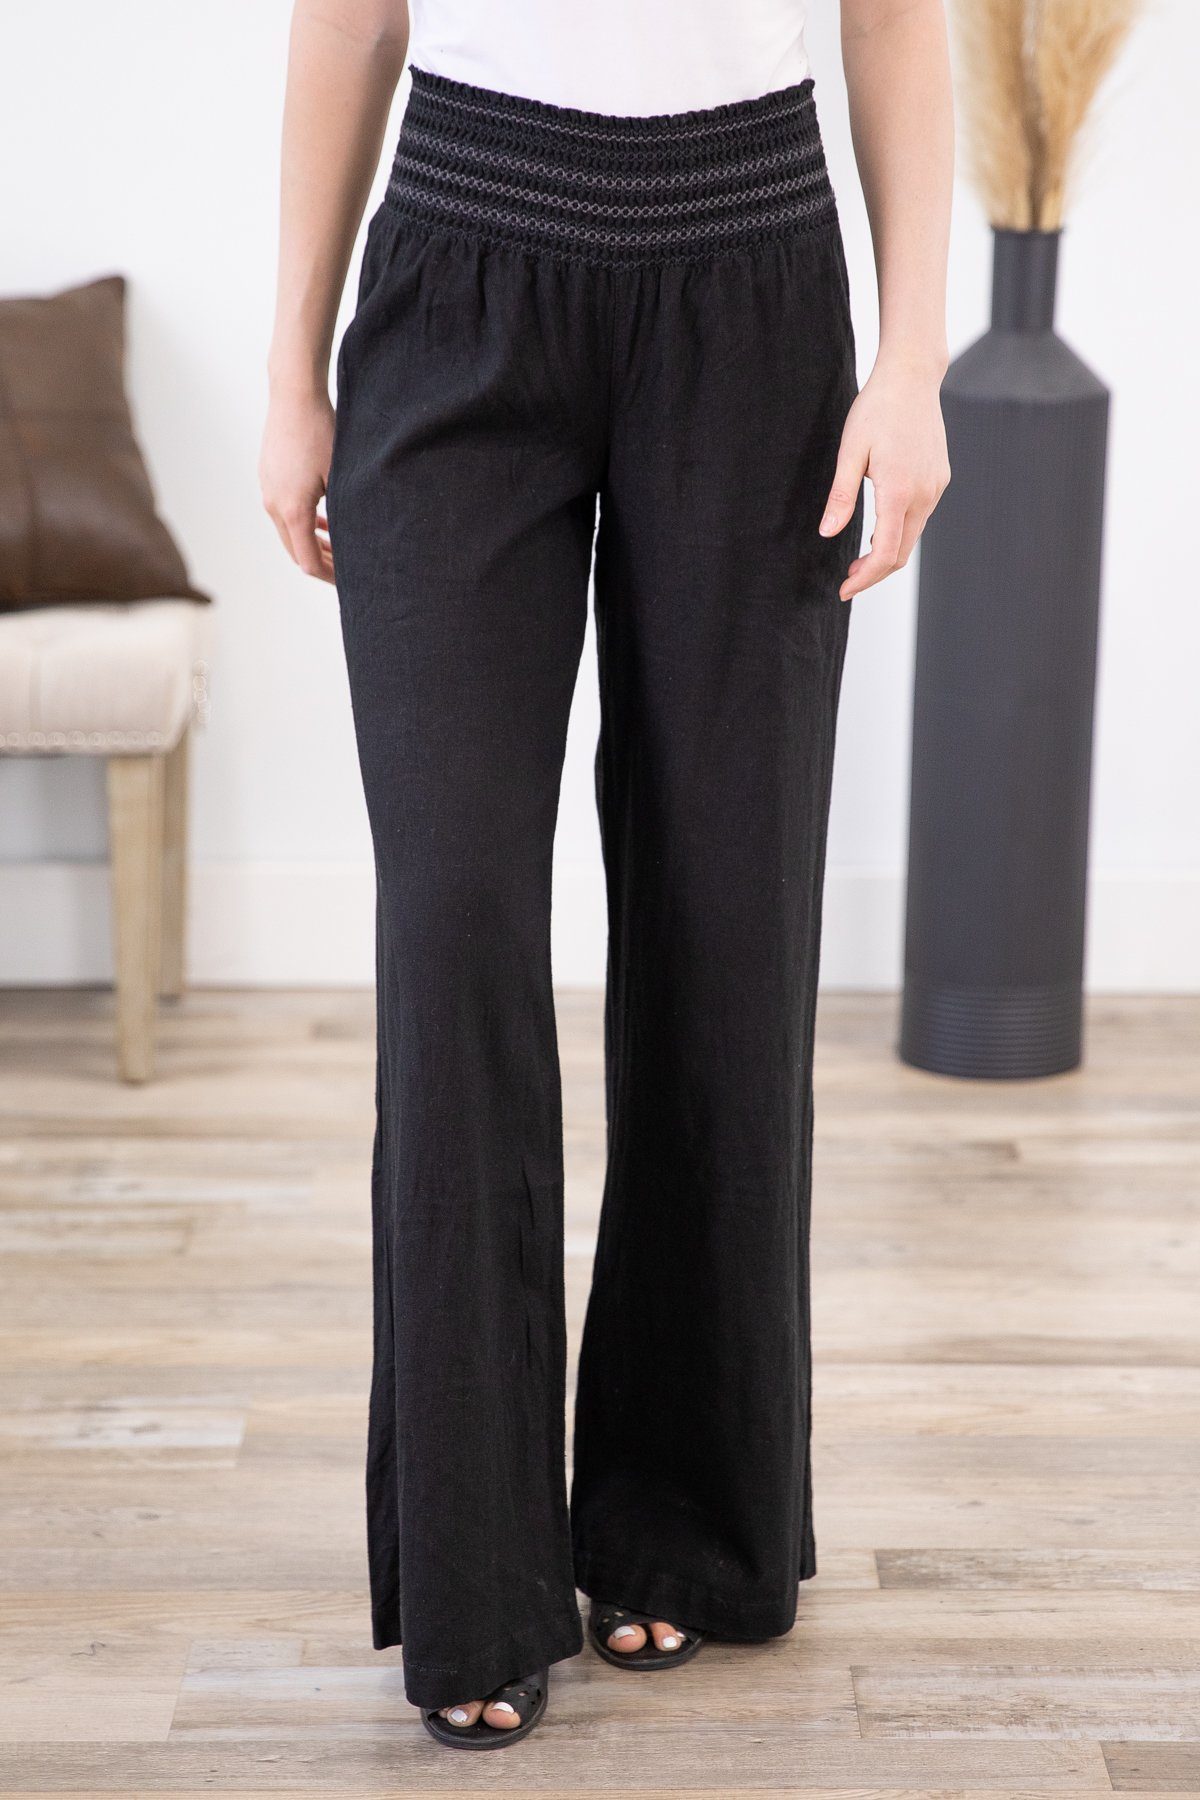 Black Embroidered Smocked Waist Palazzo Pant - Filly Flair